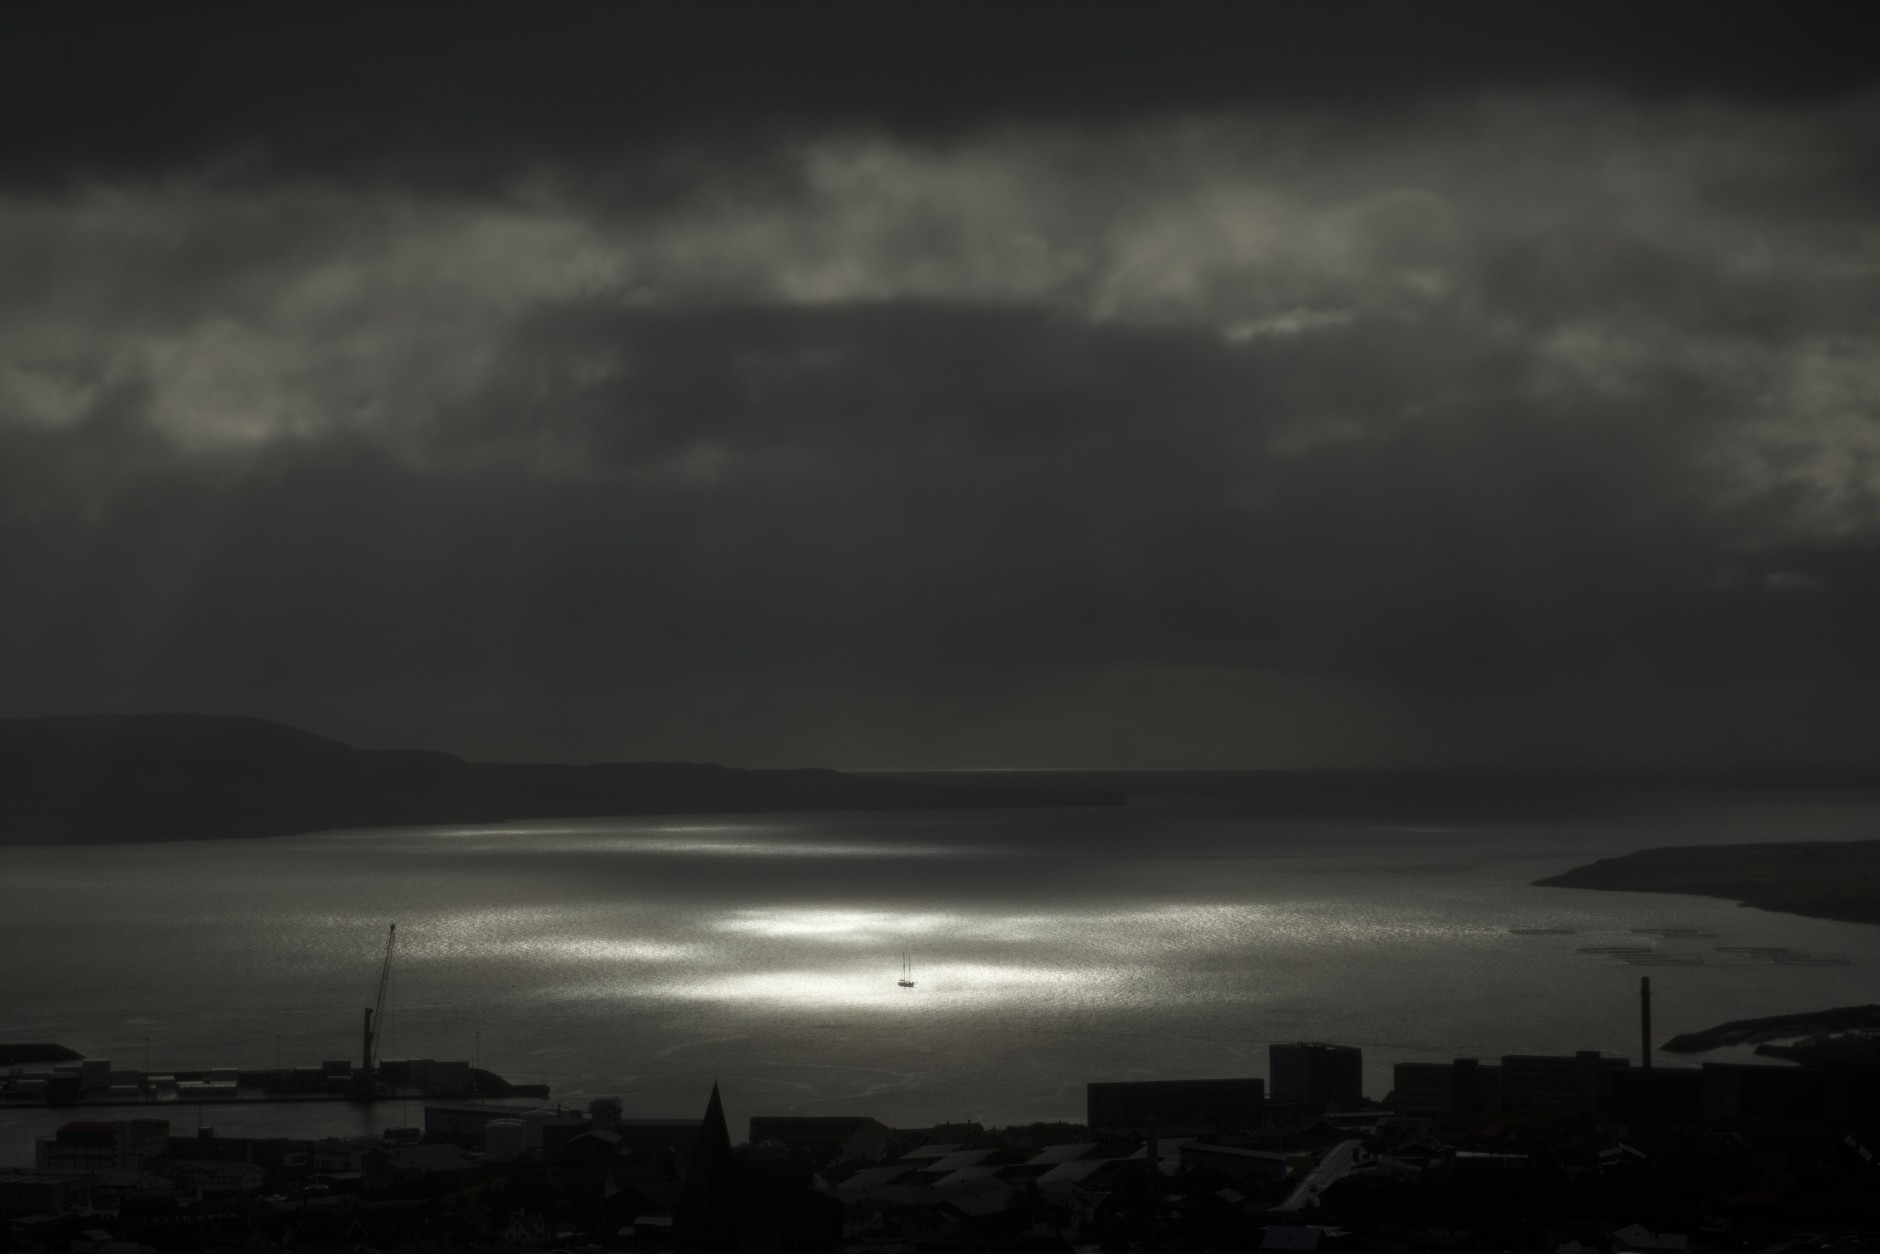 A spot of sunlight breaks through the clouds and shines on a vessel on the sea during the partial phase of a solar eclipse before totality as seen from a hill beside a hotel on the edge of the city overlooking Torshavn, the capital of the Faeroe Islands, Friday, March 20, 2015. A blanket of clouds in the Faeroe Islands blocked thousands of people there from experiencing the full effect of the total eclipse. The clouds then cleared after totality.  (AP Photo/Matt Dunham)